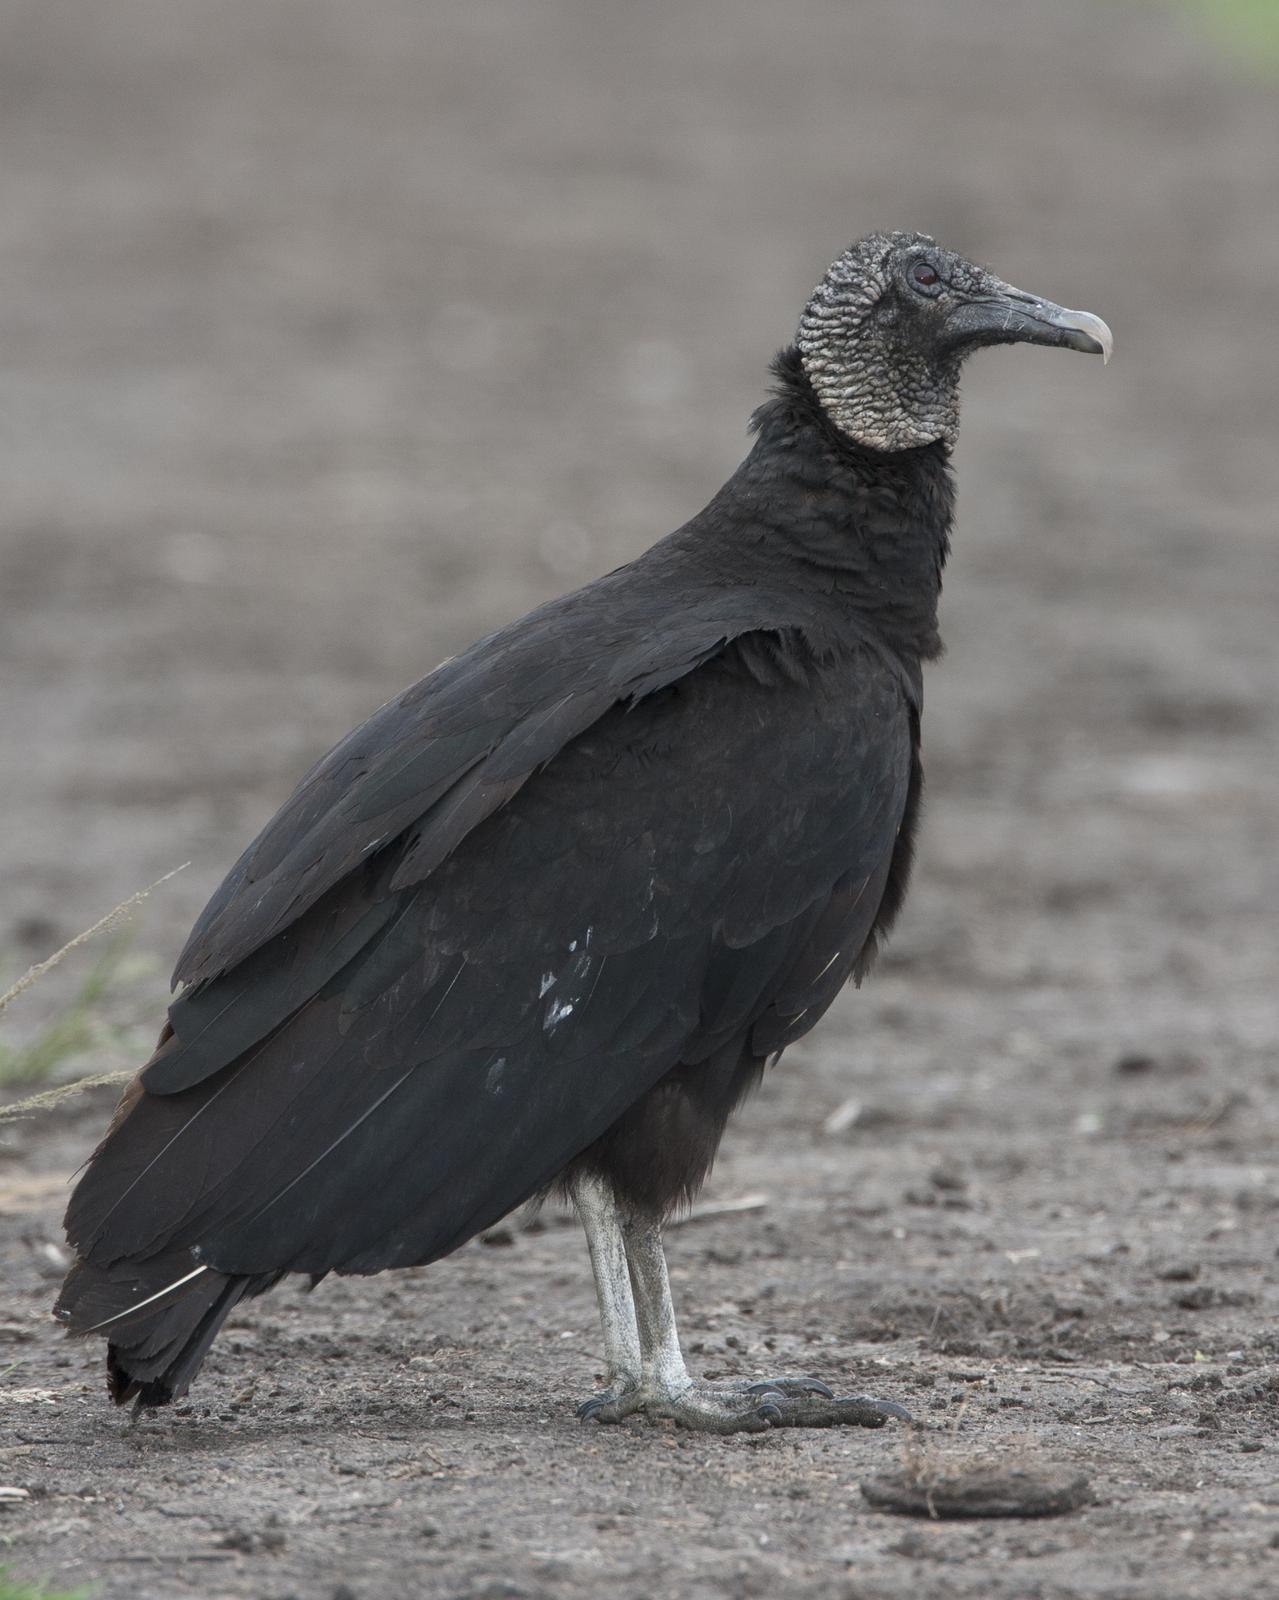 Black Vulture Photo by Jeff Moore